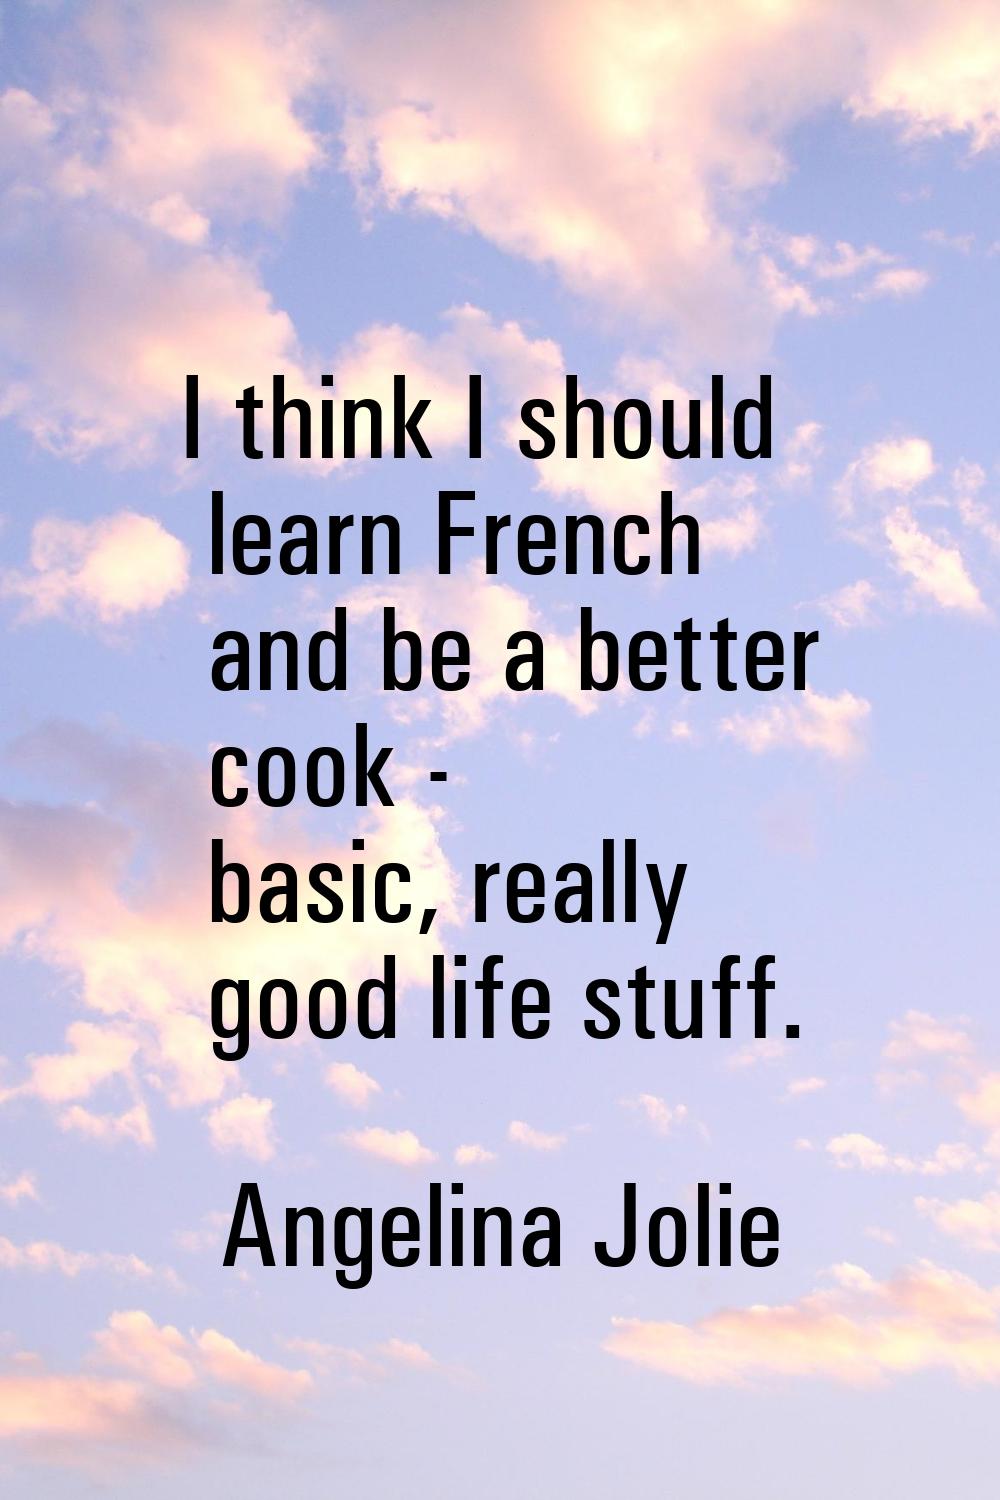 I think I should learn French and be a better cook - basic, really good life stuff.